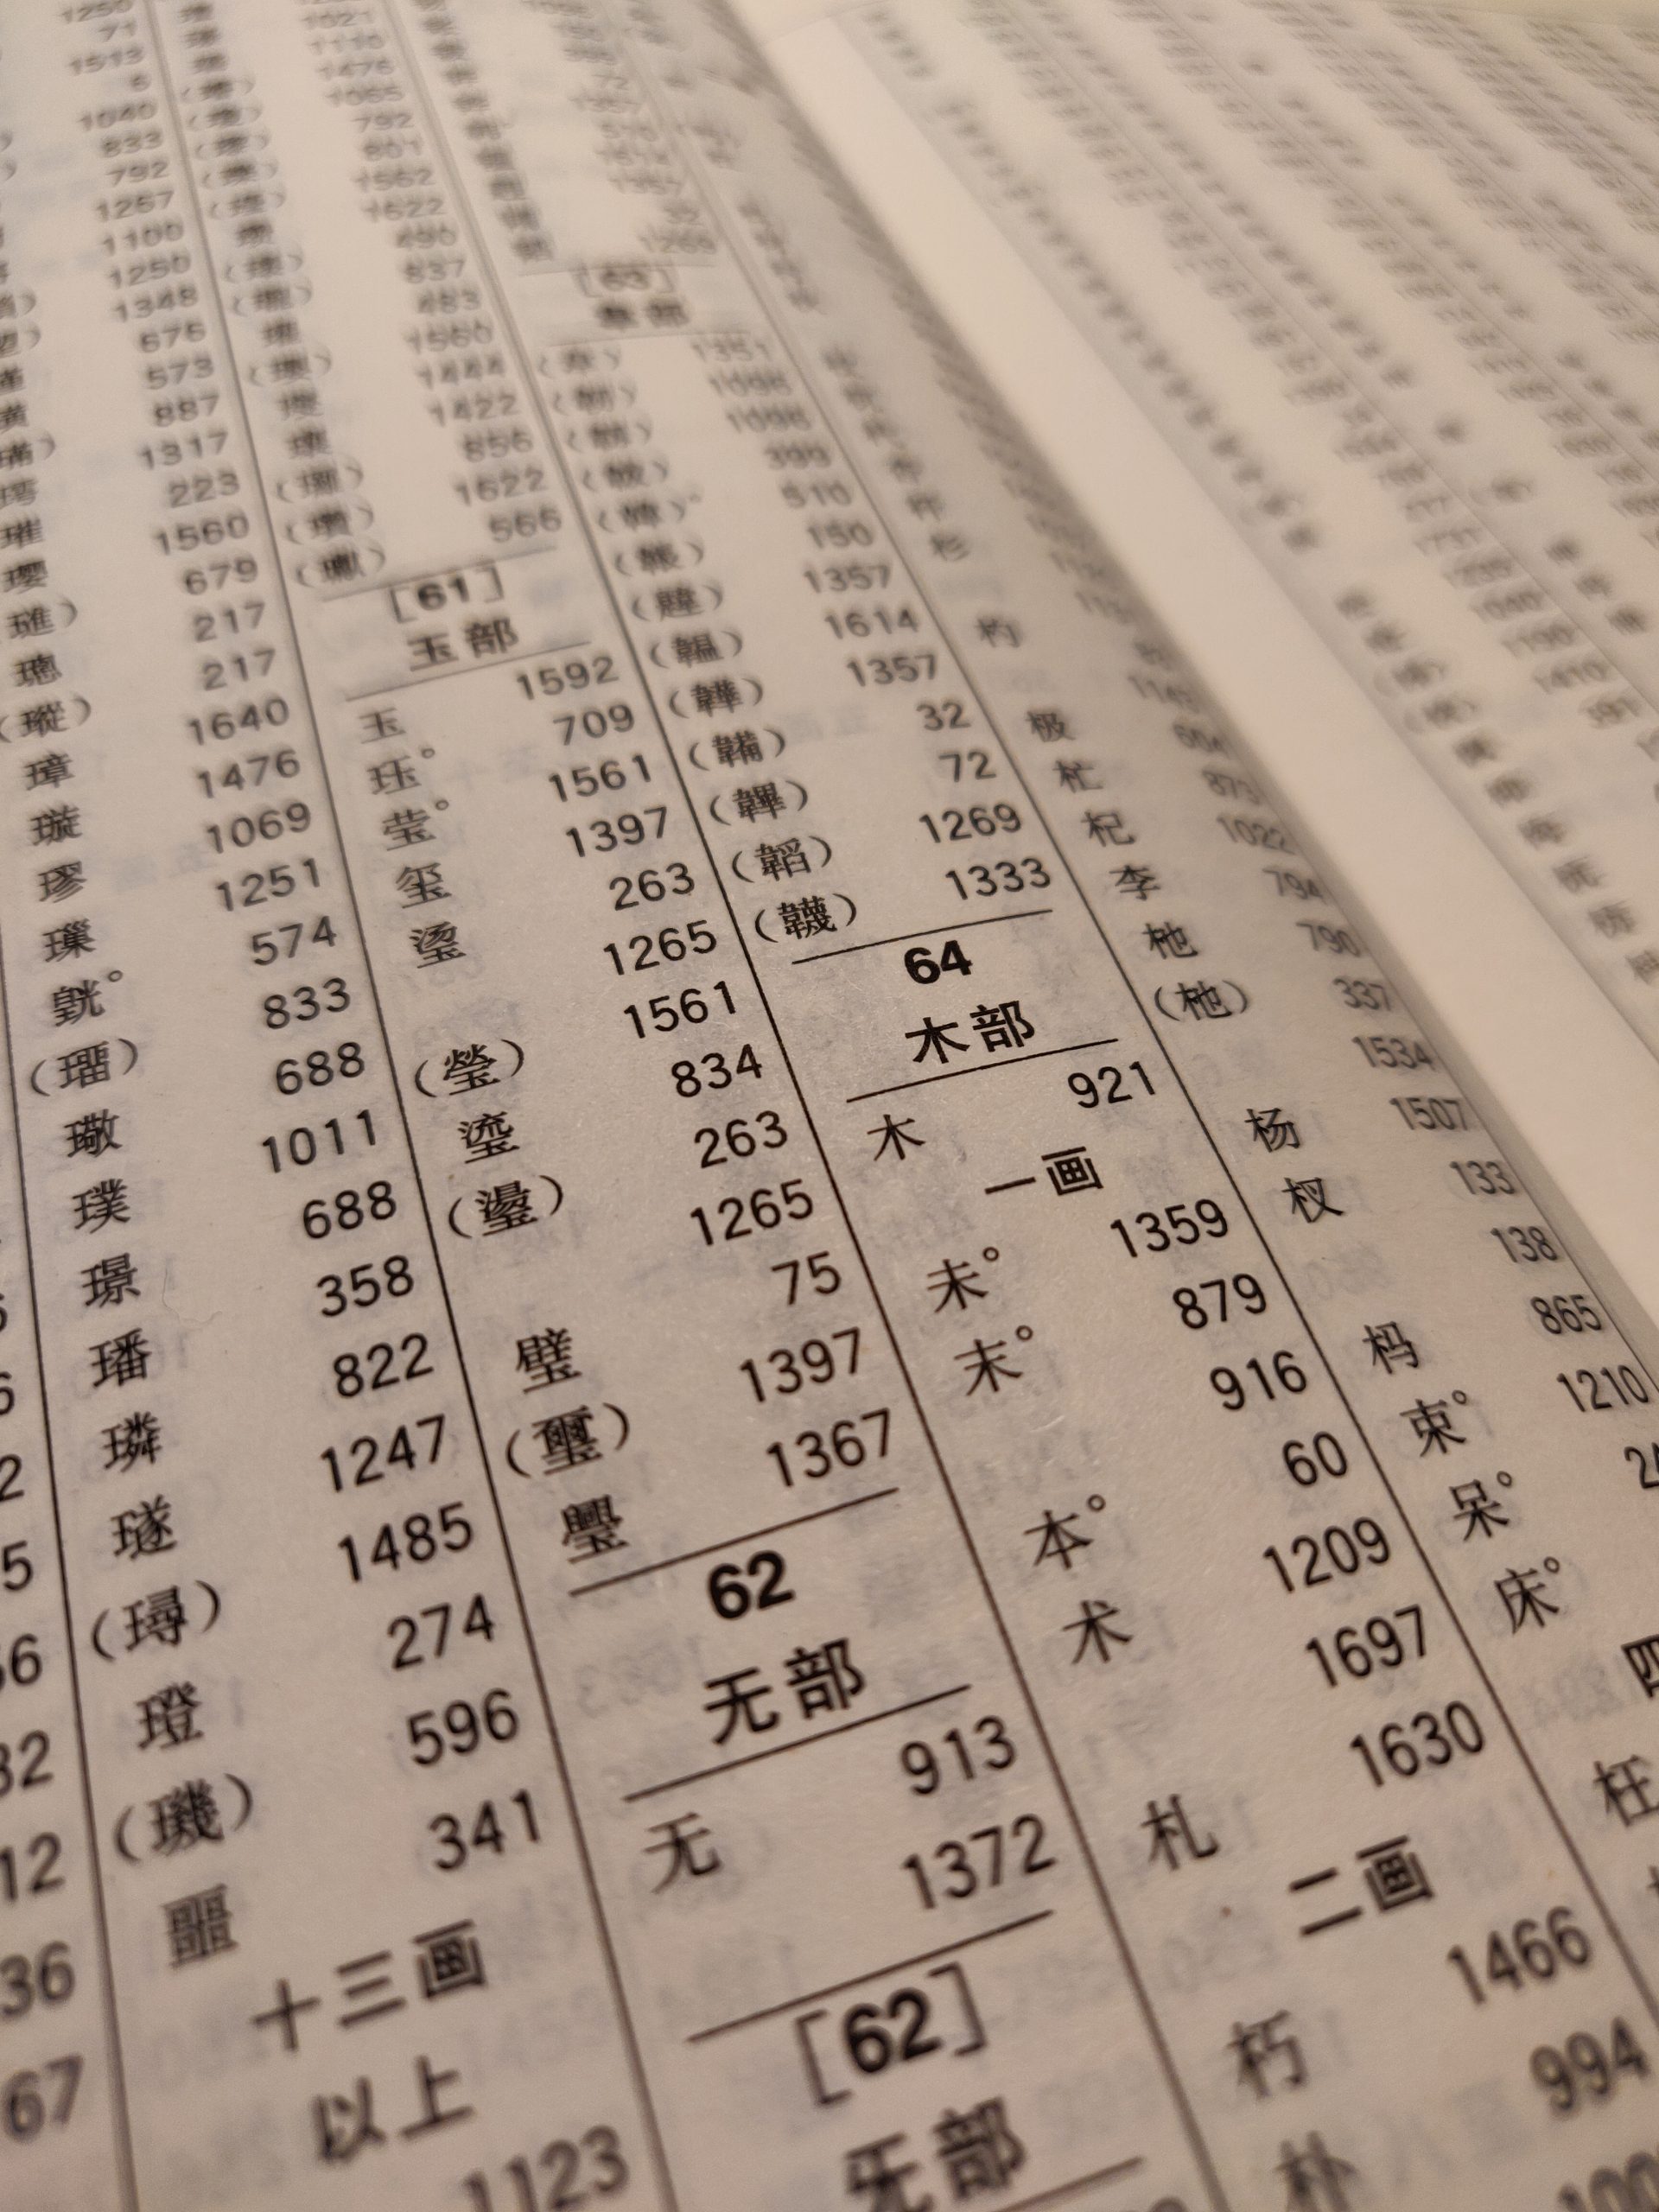 How To Look Up Chinese Characters You Don T Know Hacking Chinese